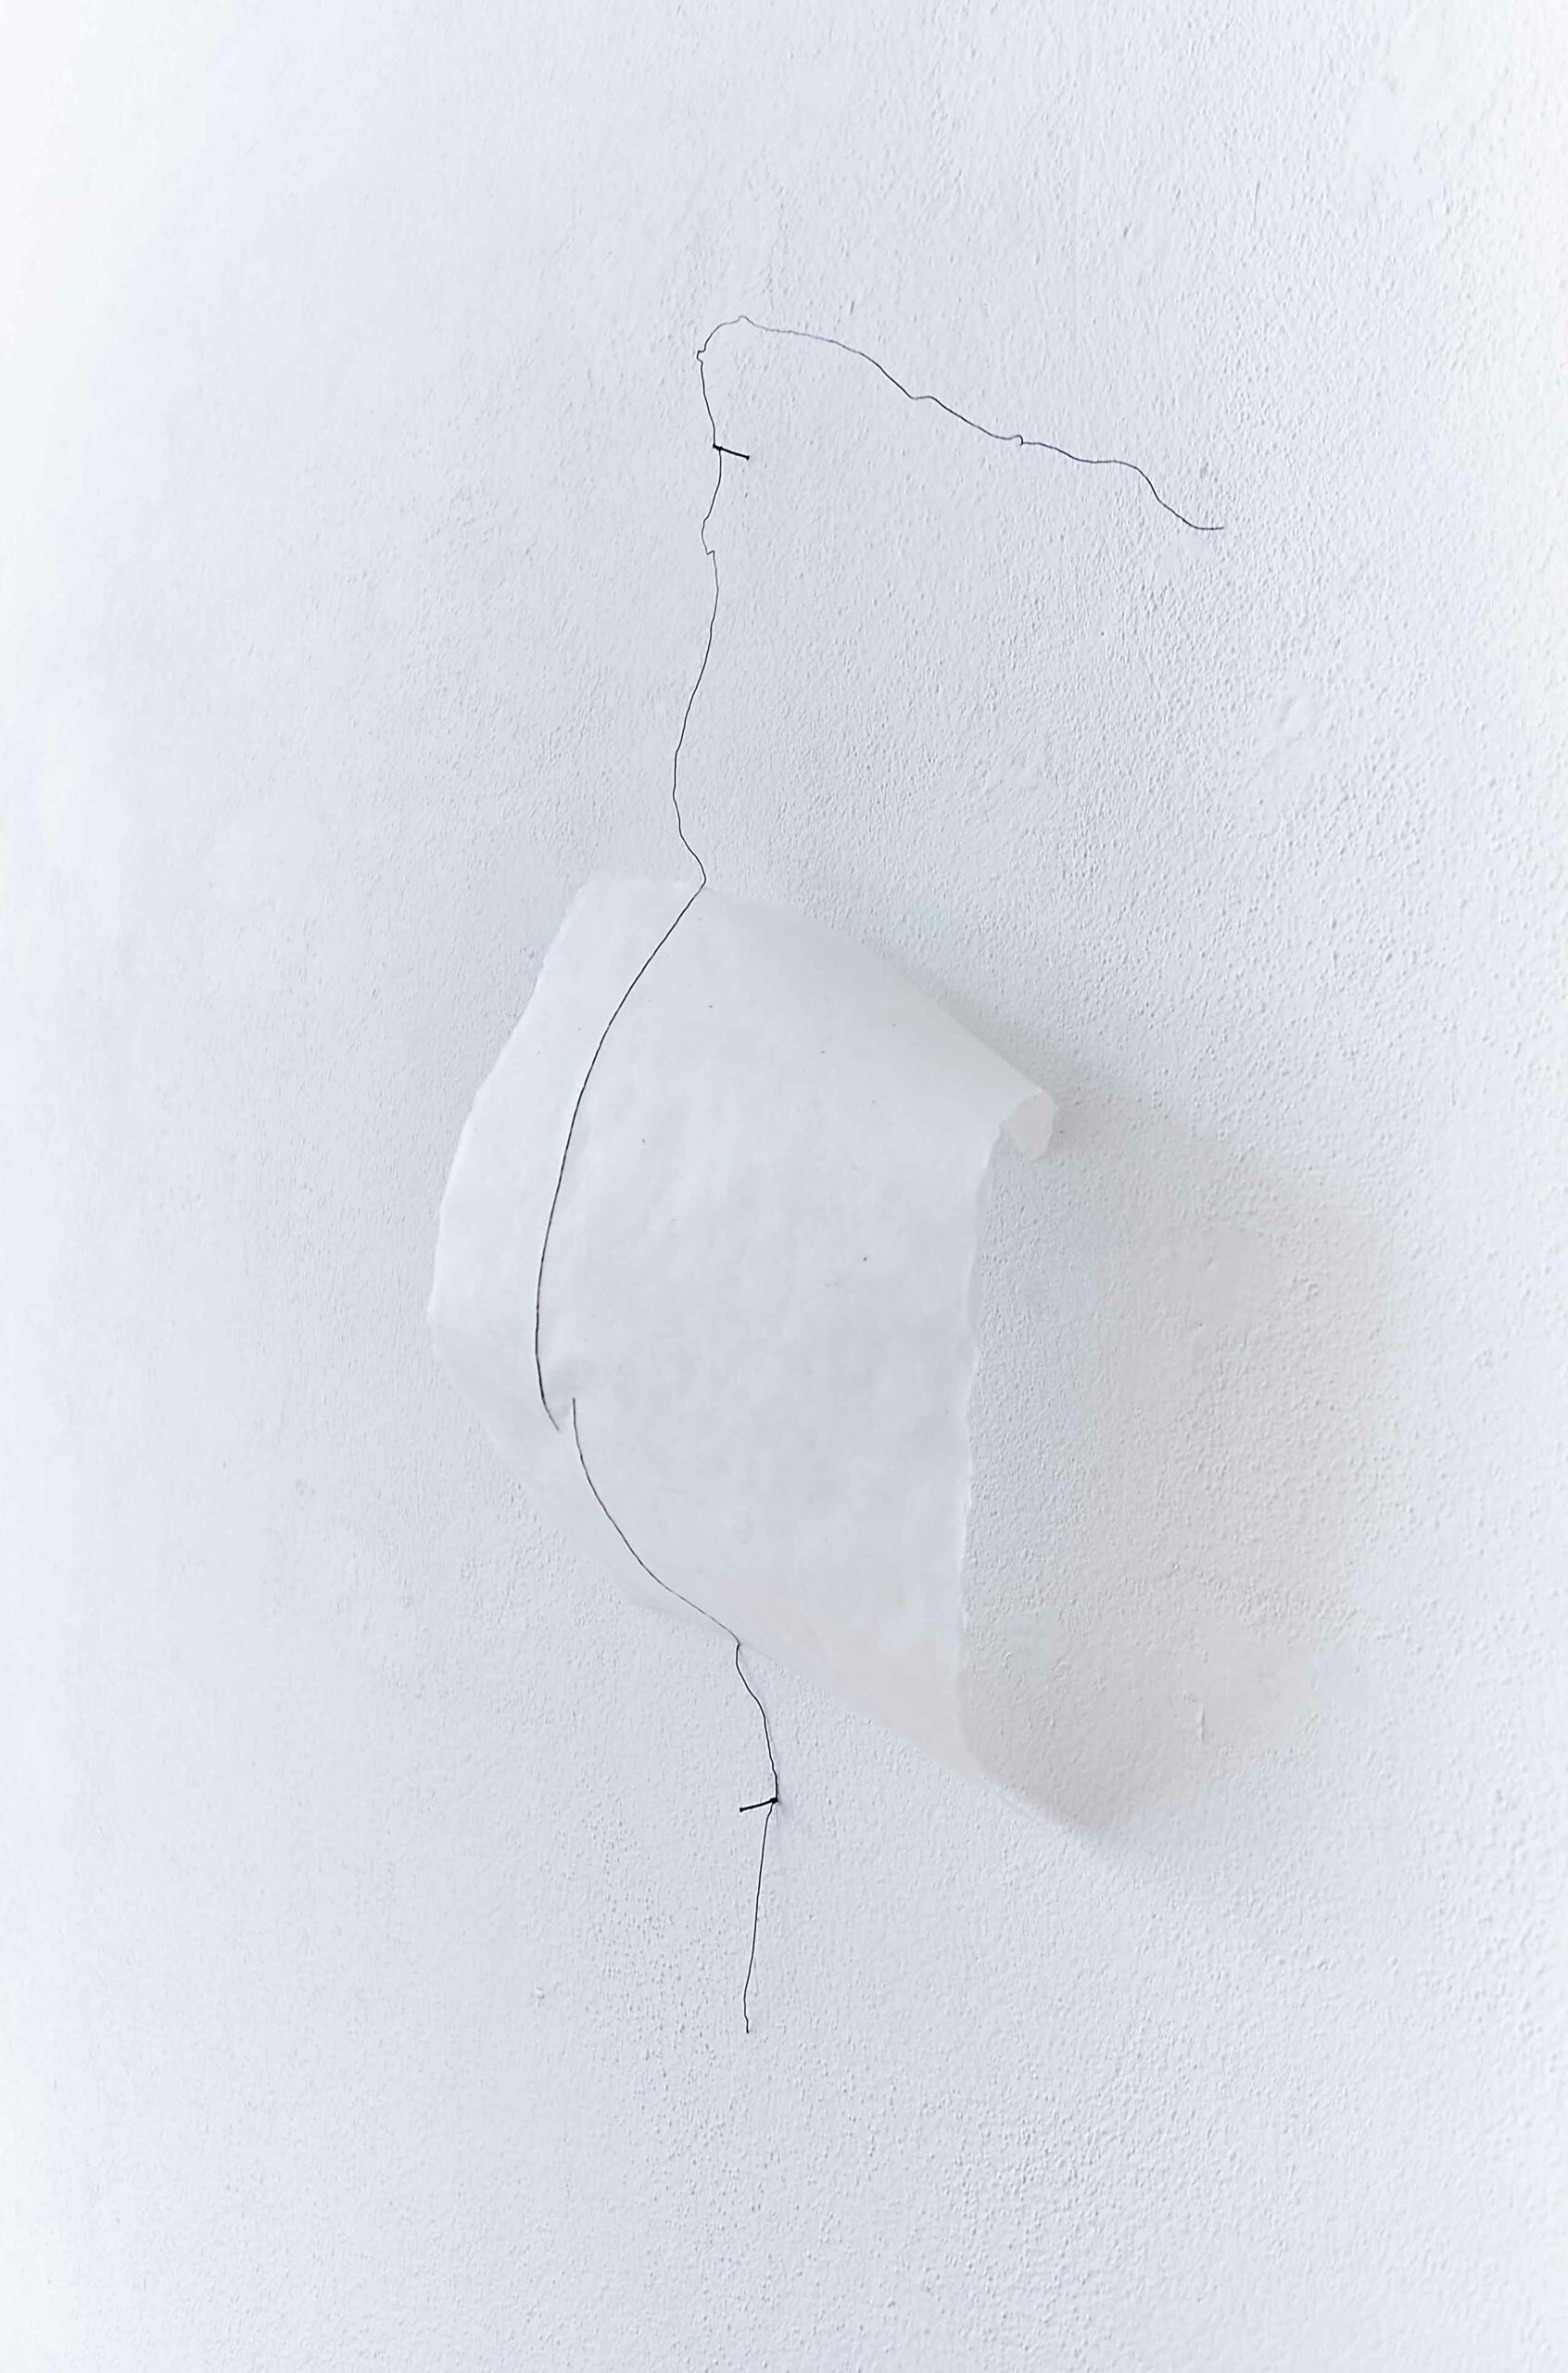 two black wire lines running across a bended white handmade paper off a white wall